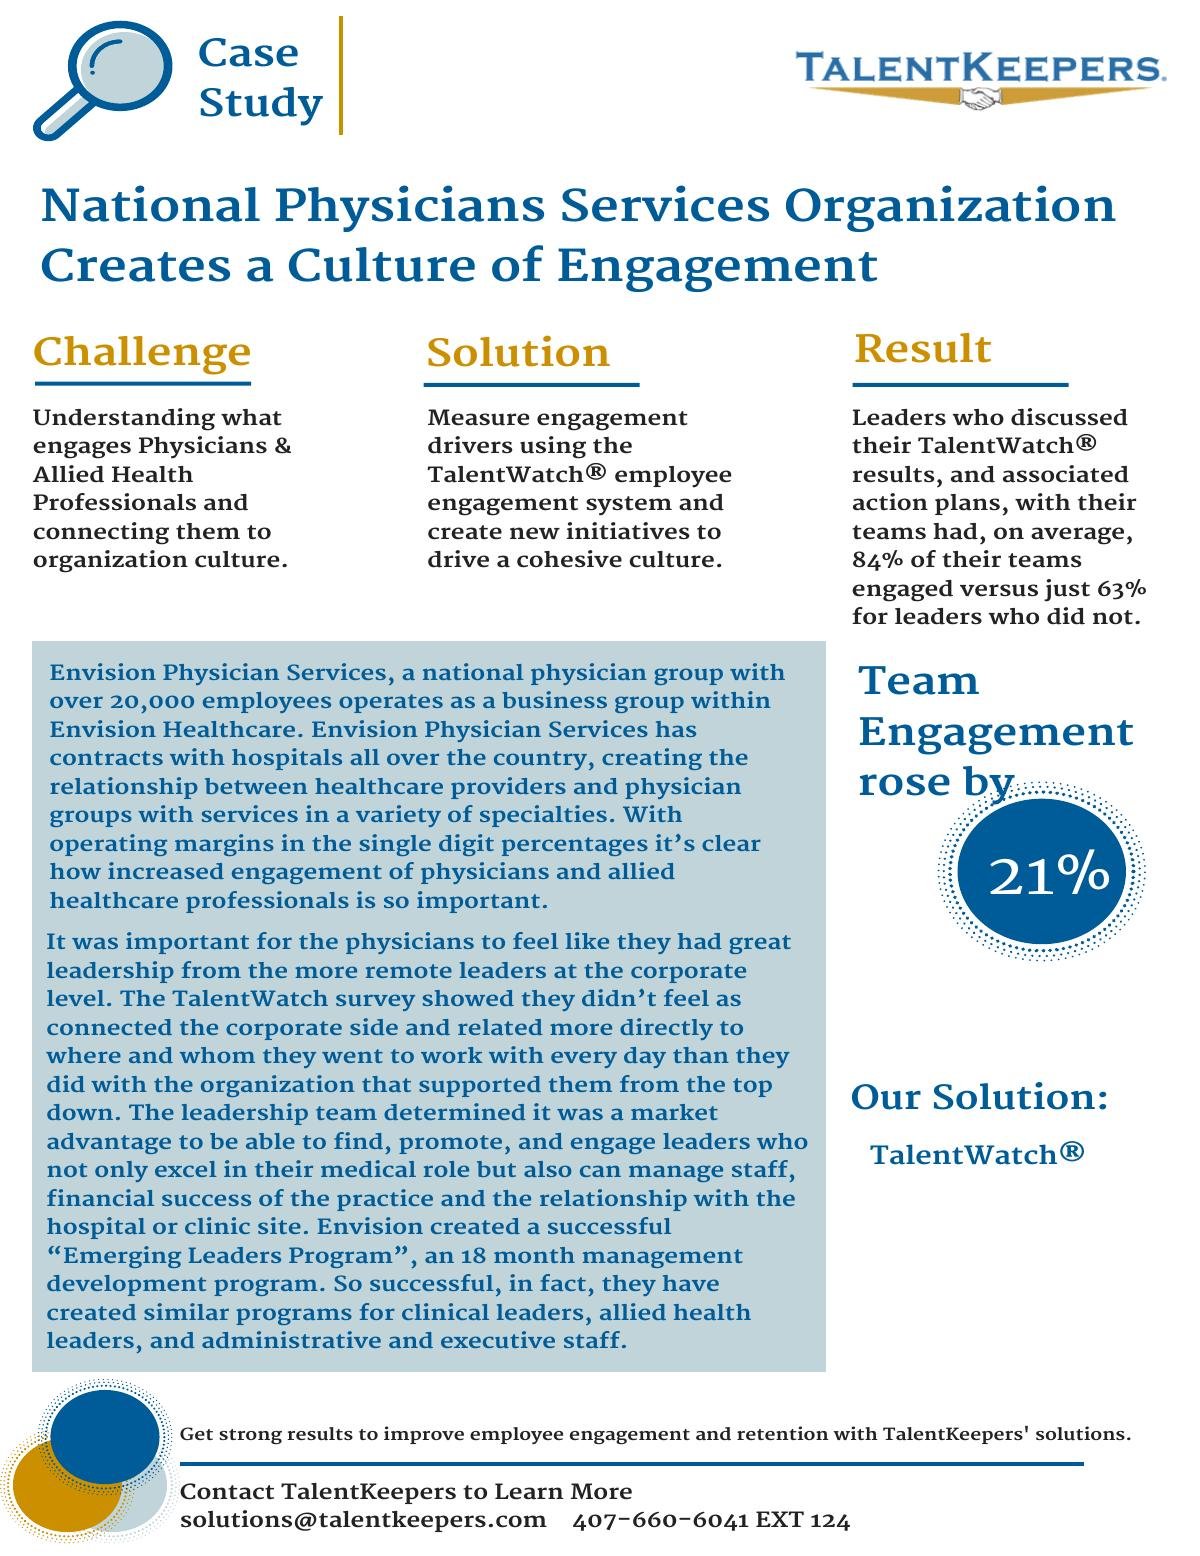 National Physicians Services Organization Case Study